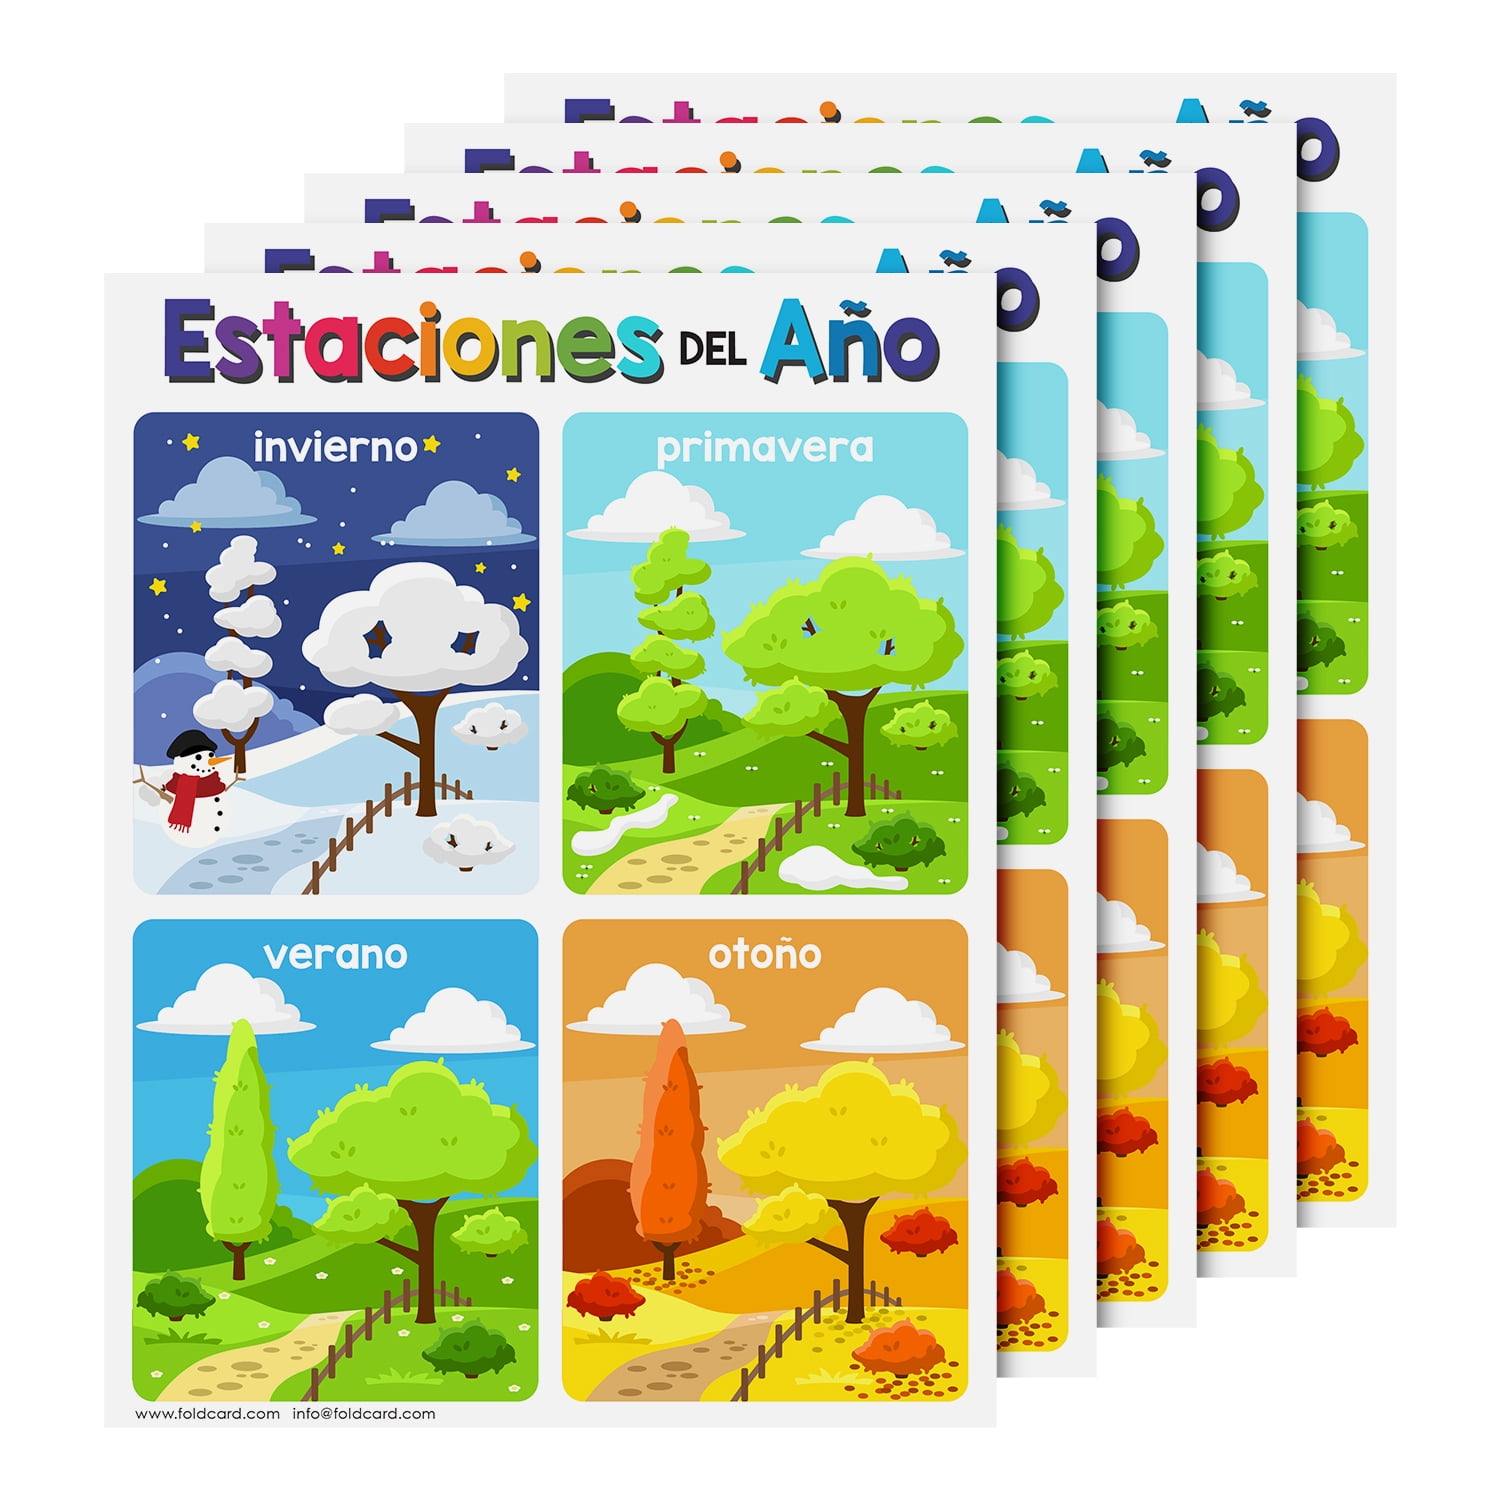 El Alfabeto Spanish Educational Posters for Kids Alphabet Bilingual Classroom and Homeschool Learning Visual Aid and Chart Decorations for Classrooms